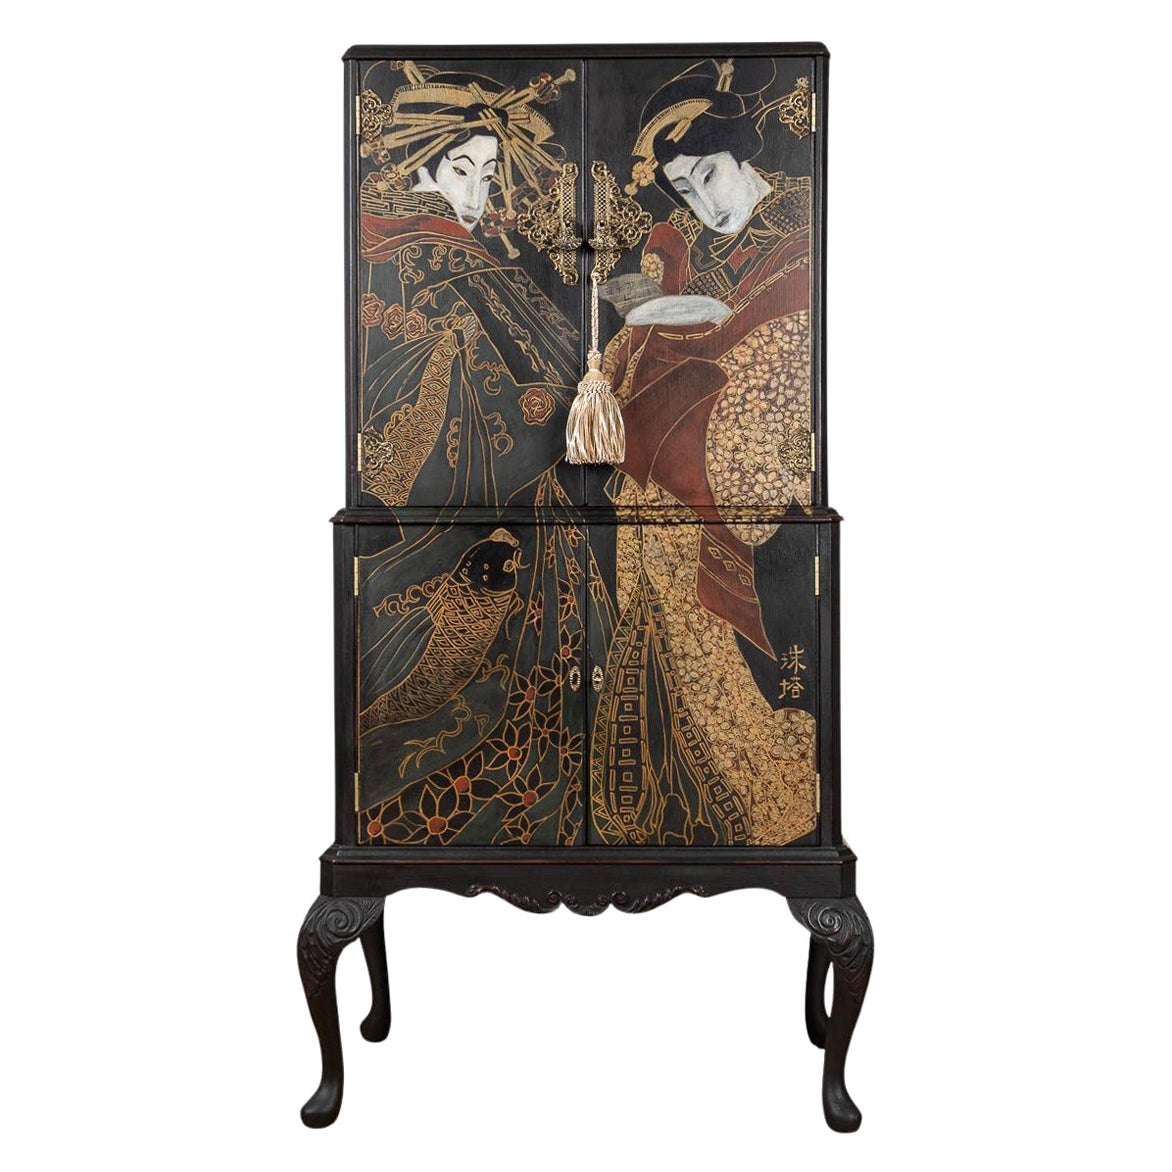 Japanesque Style Cocktail Cabinet Handpainted Depicting A 'Geisha' For Sale